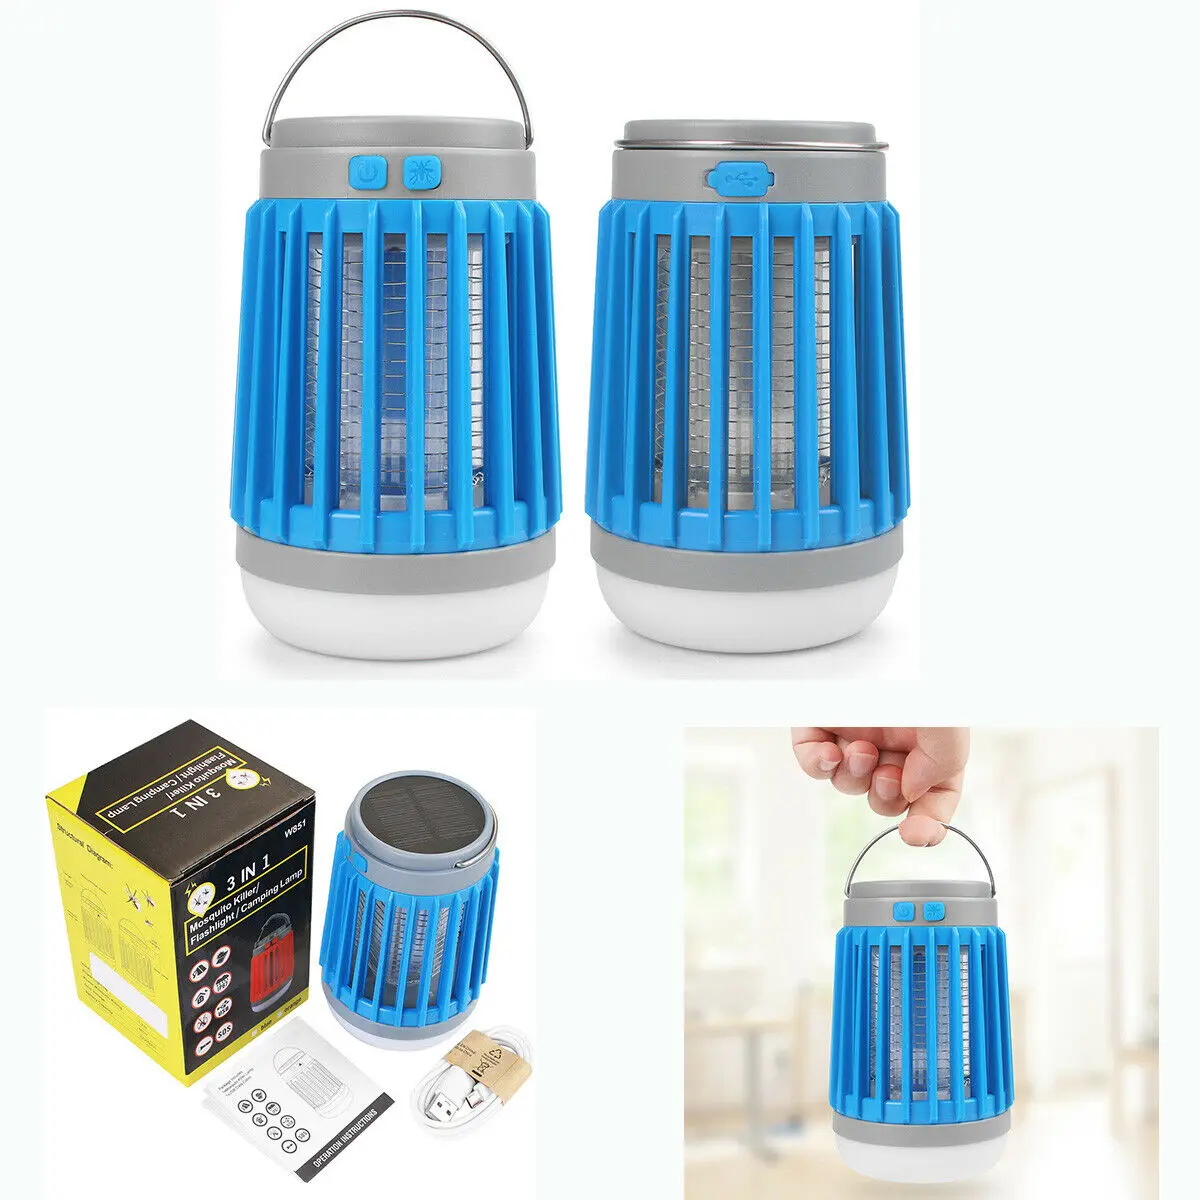 

Solar USB Mosquito Killer Light Electric Trap Lamp Fly Bug Zapper Pest Control Insect Pest Killer Trapping LED Lamp for Camping